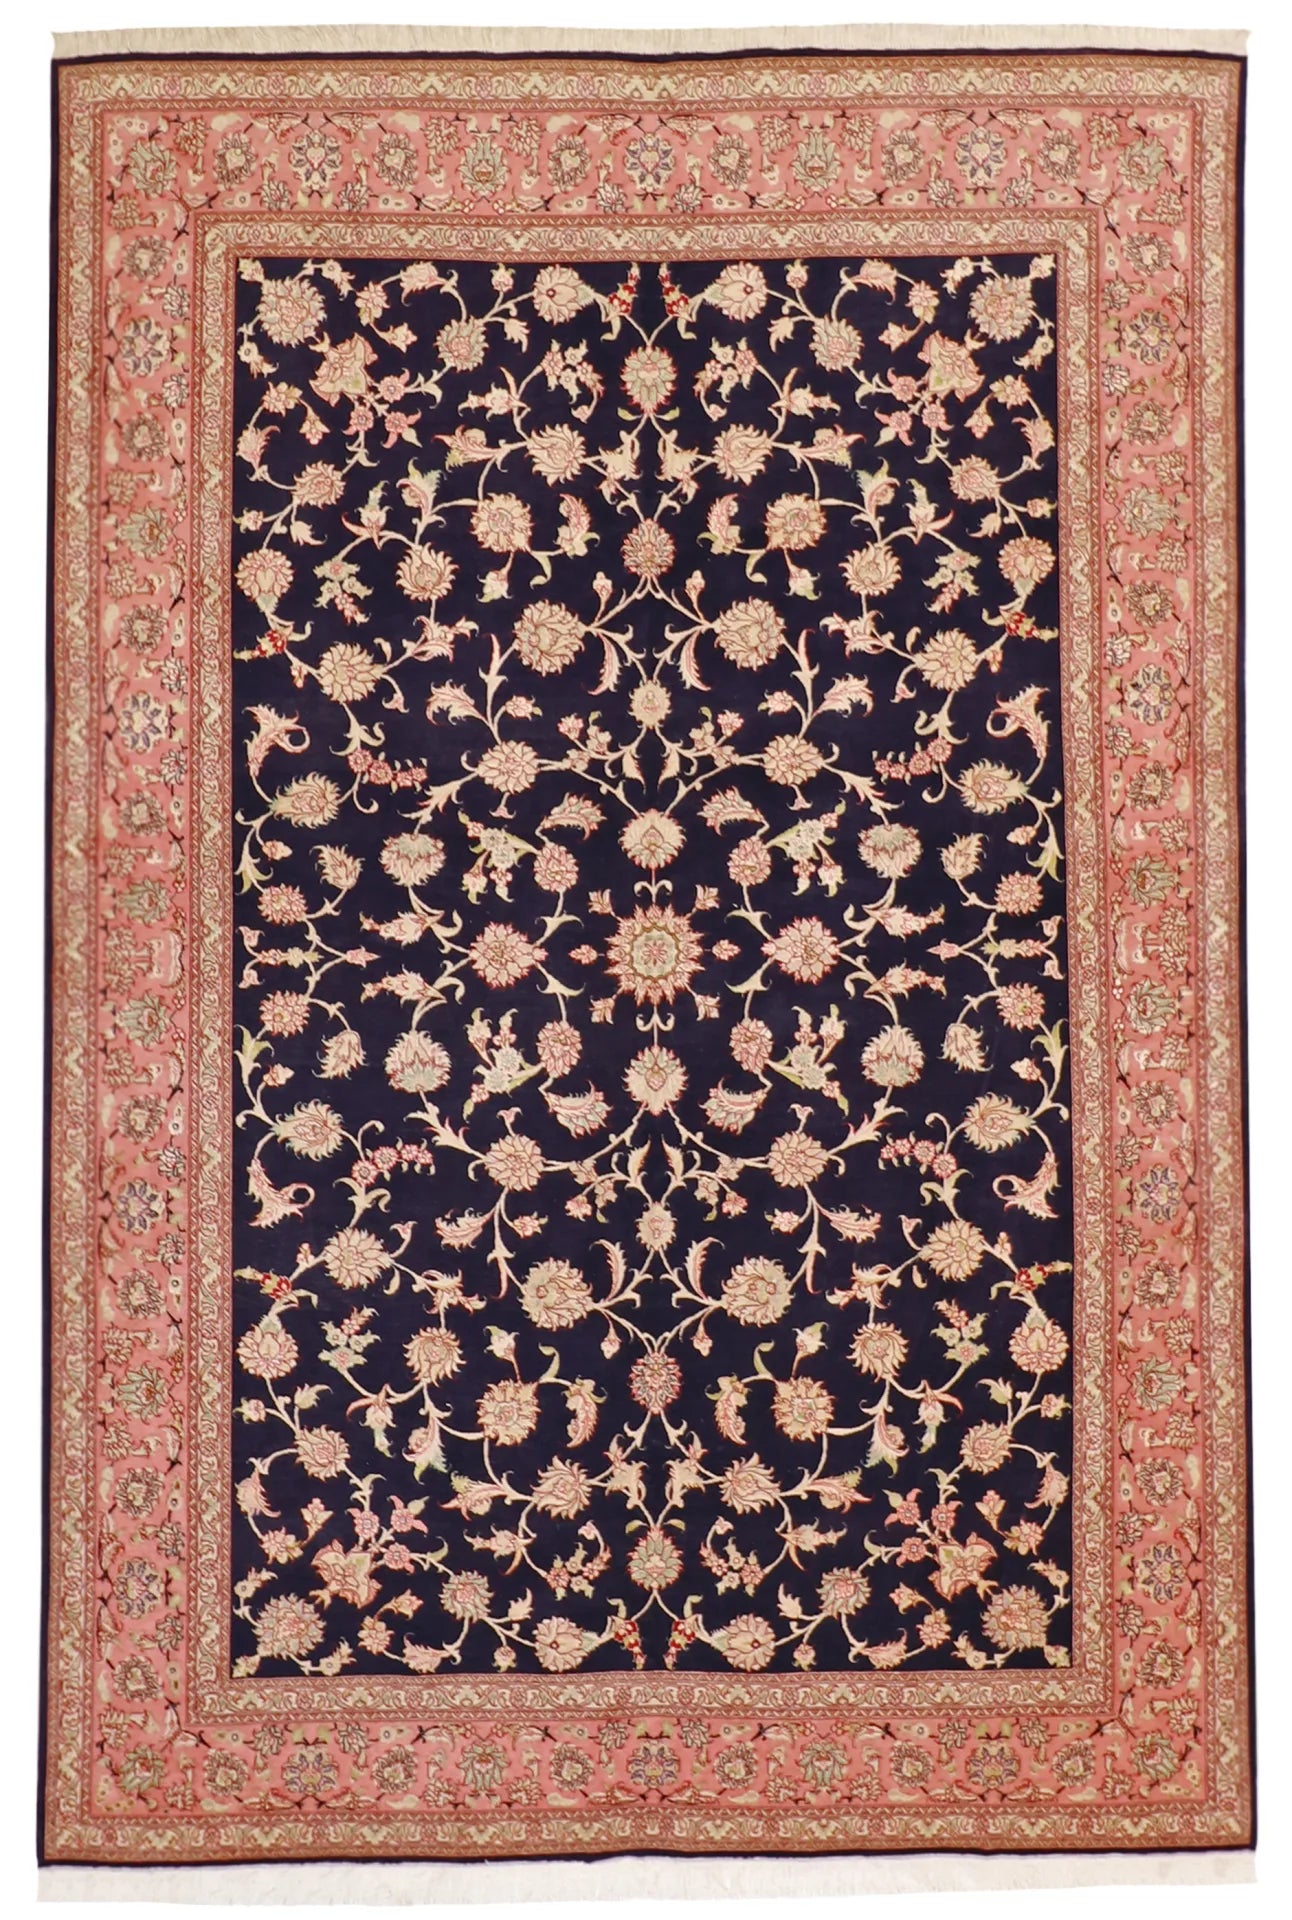 6x9 - Tabriz Fine/Wool/Silk All Over Rectangle - Hand Knotted Rug